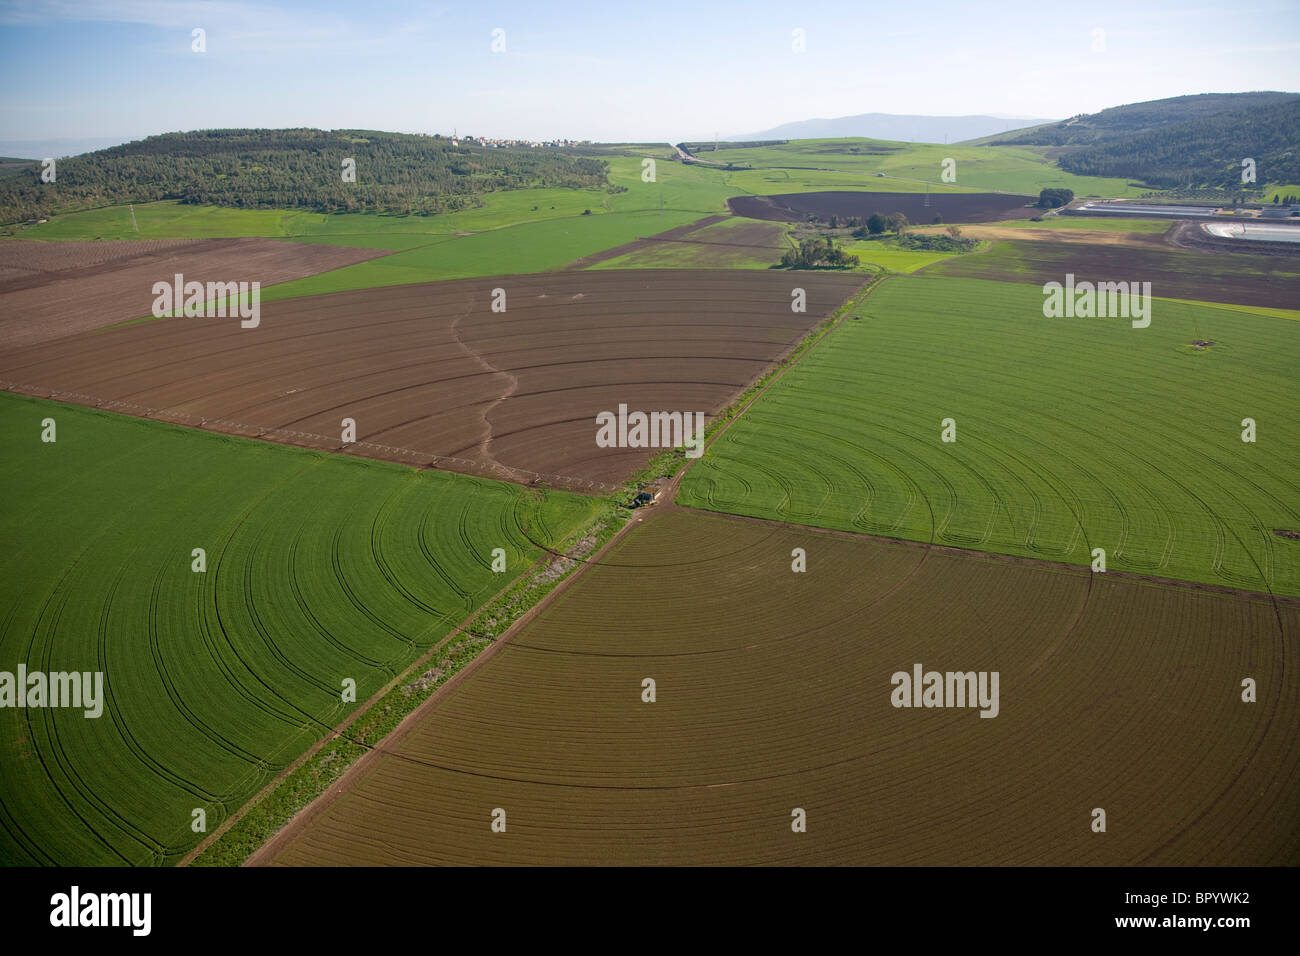 Abstract view of the agriculture fields of the Galilee Stock Photo